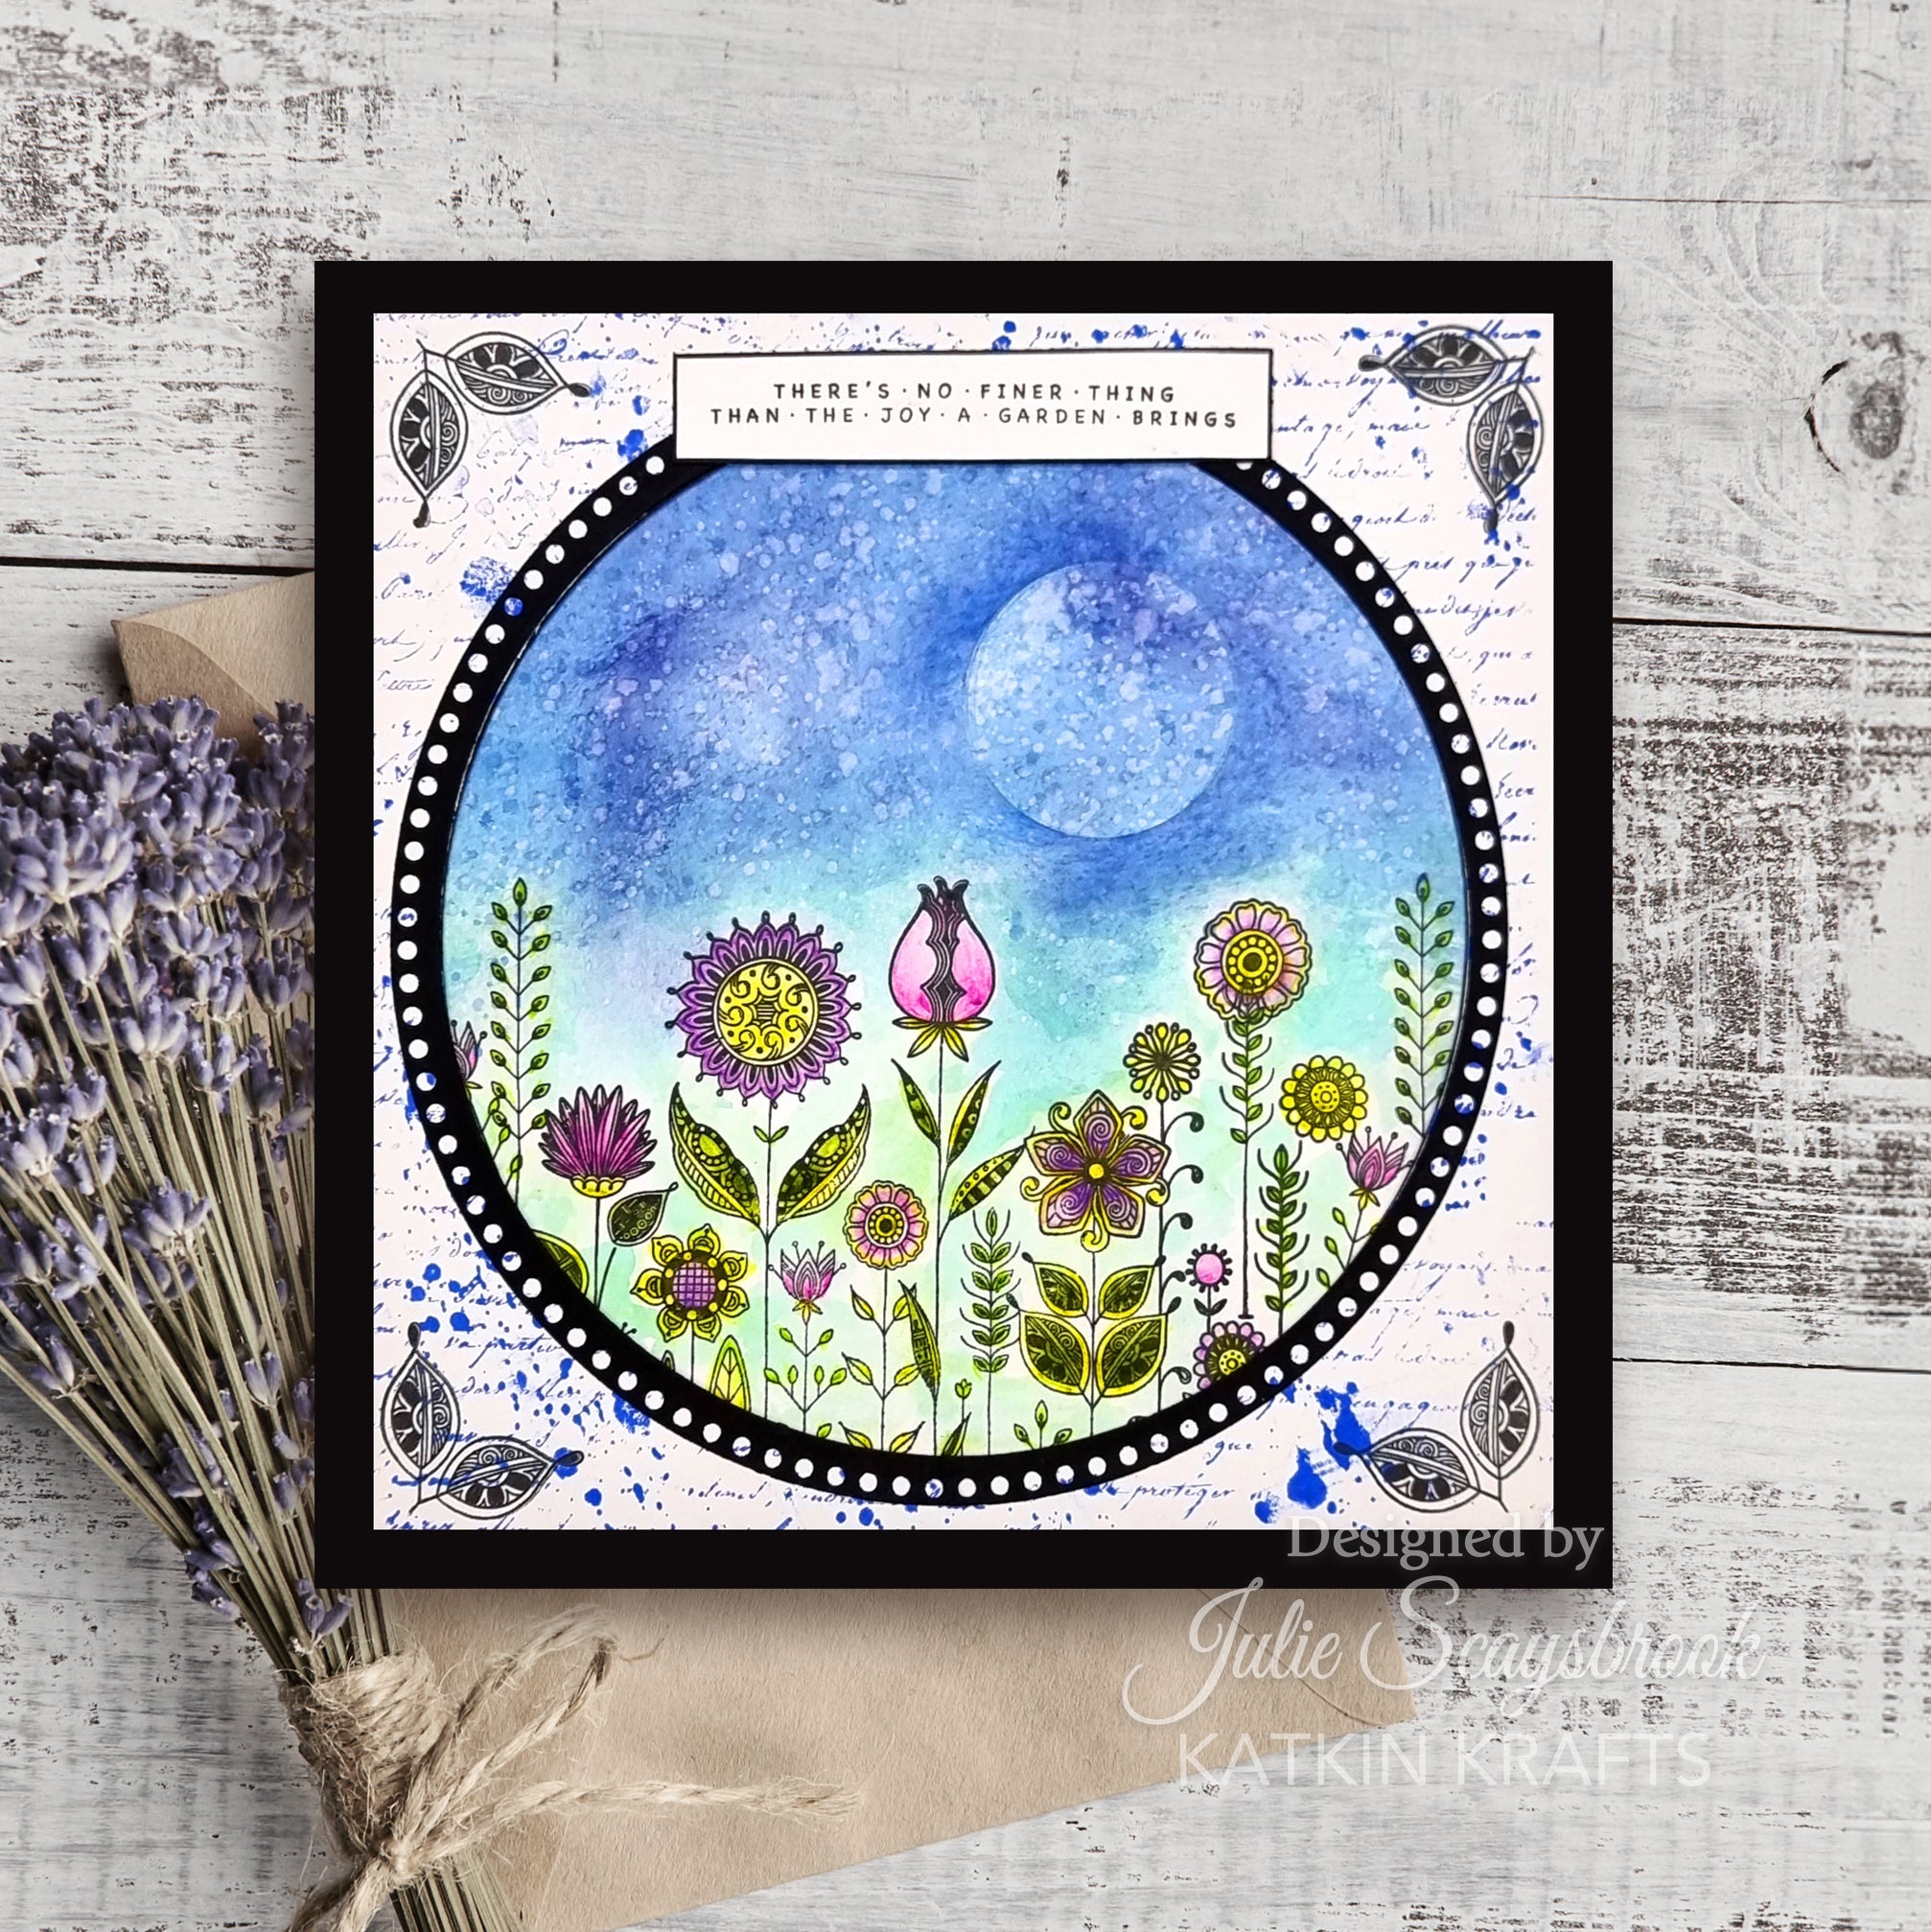 Katkin Krafts Herbaceous Border 6 in x 8 in Clear Stamp Set